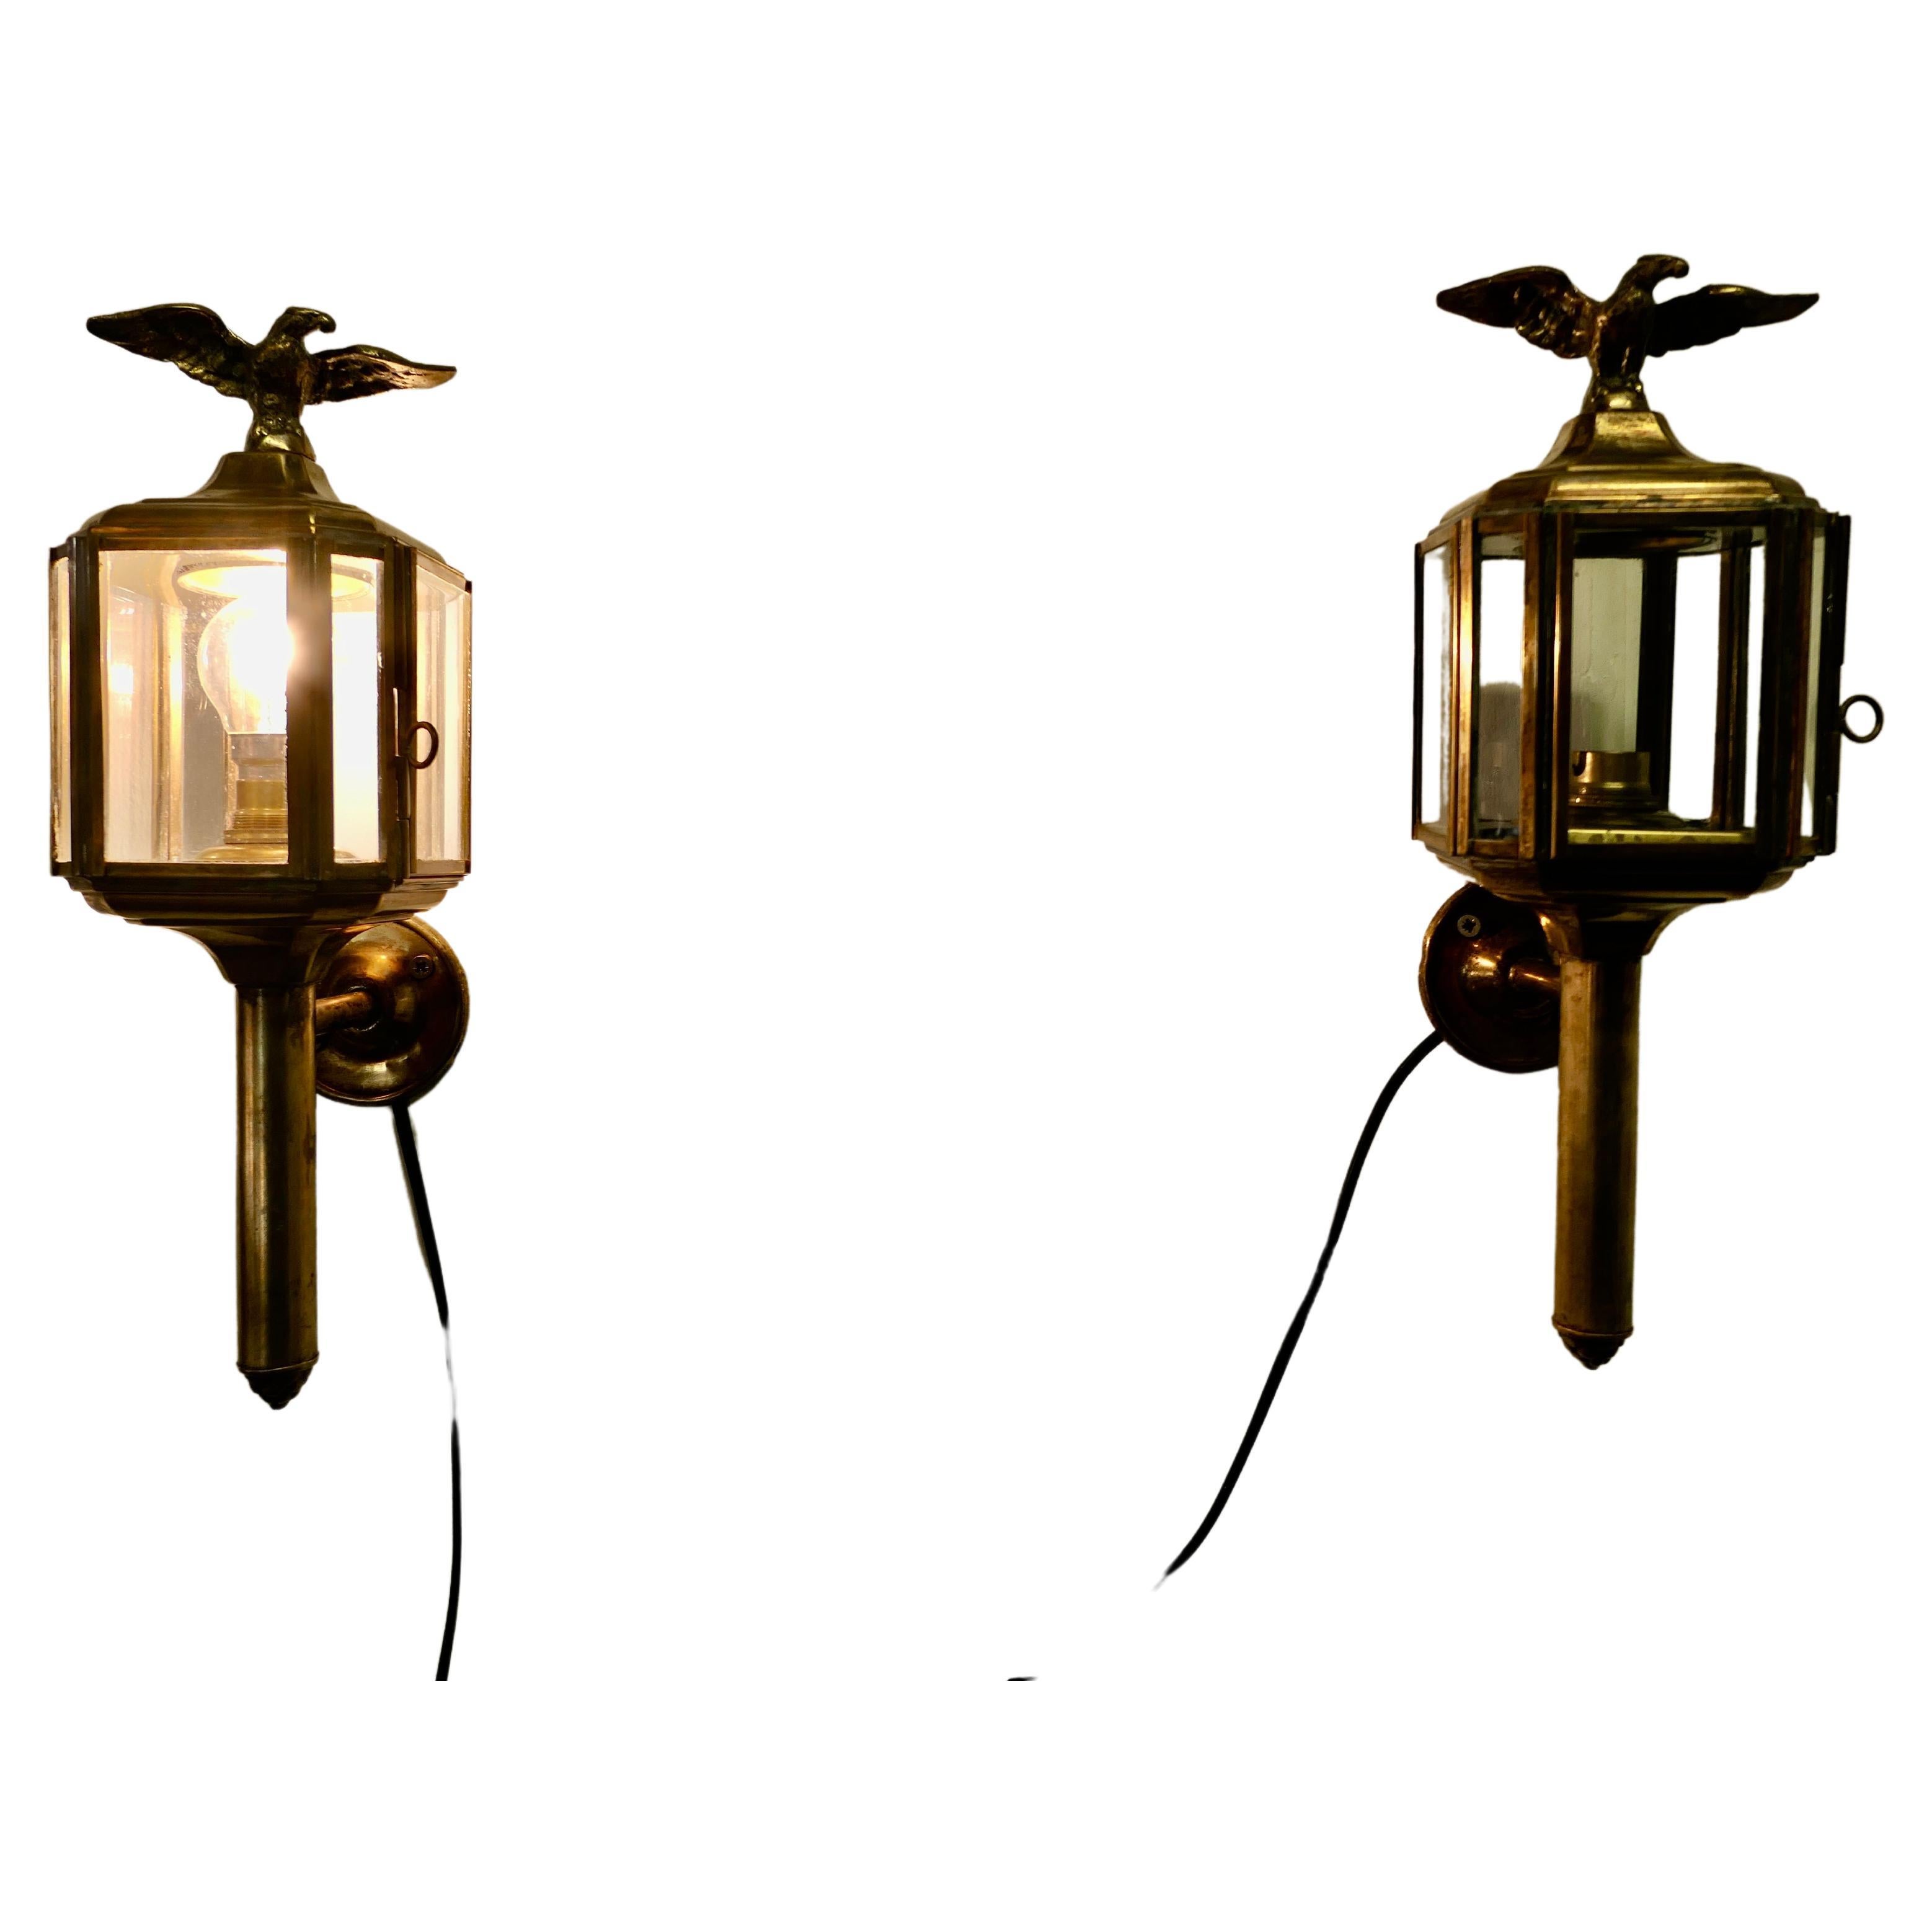 Pair of Brass Carriage Style Wall Lights, Lanterns with Eagles For Sale